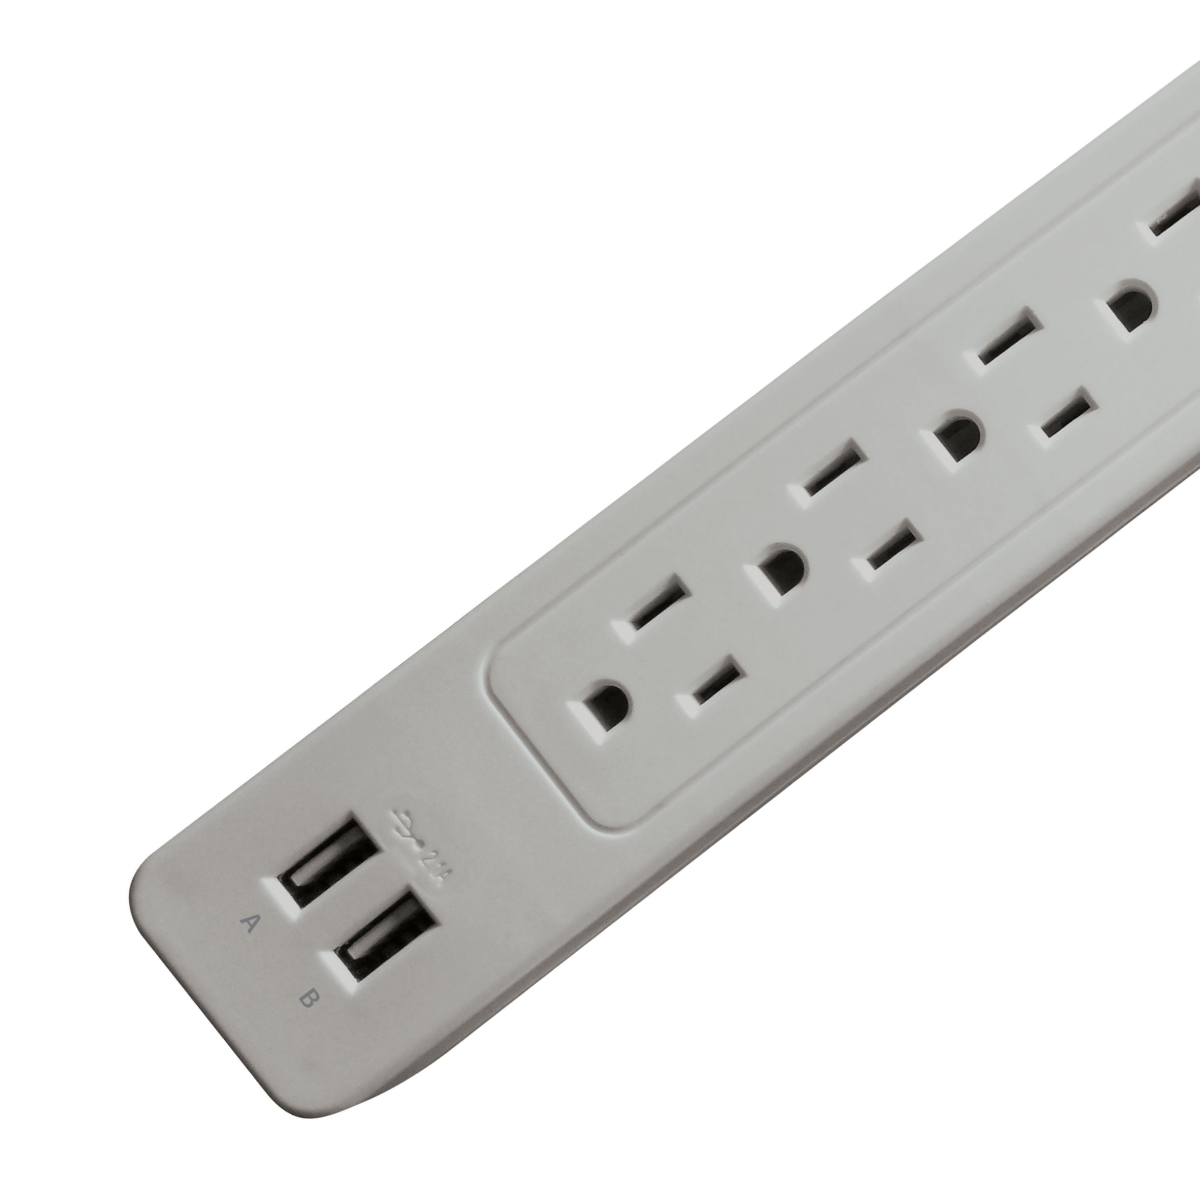 5 Outlet Power Strip SS-550 USB